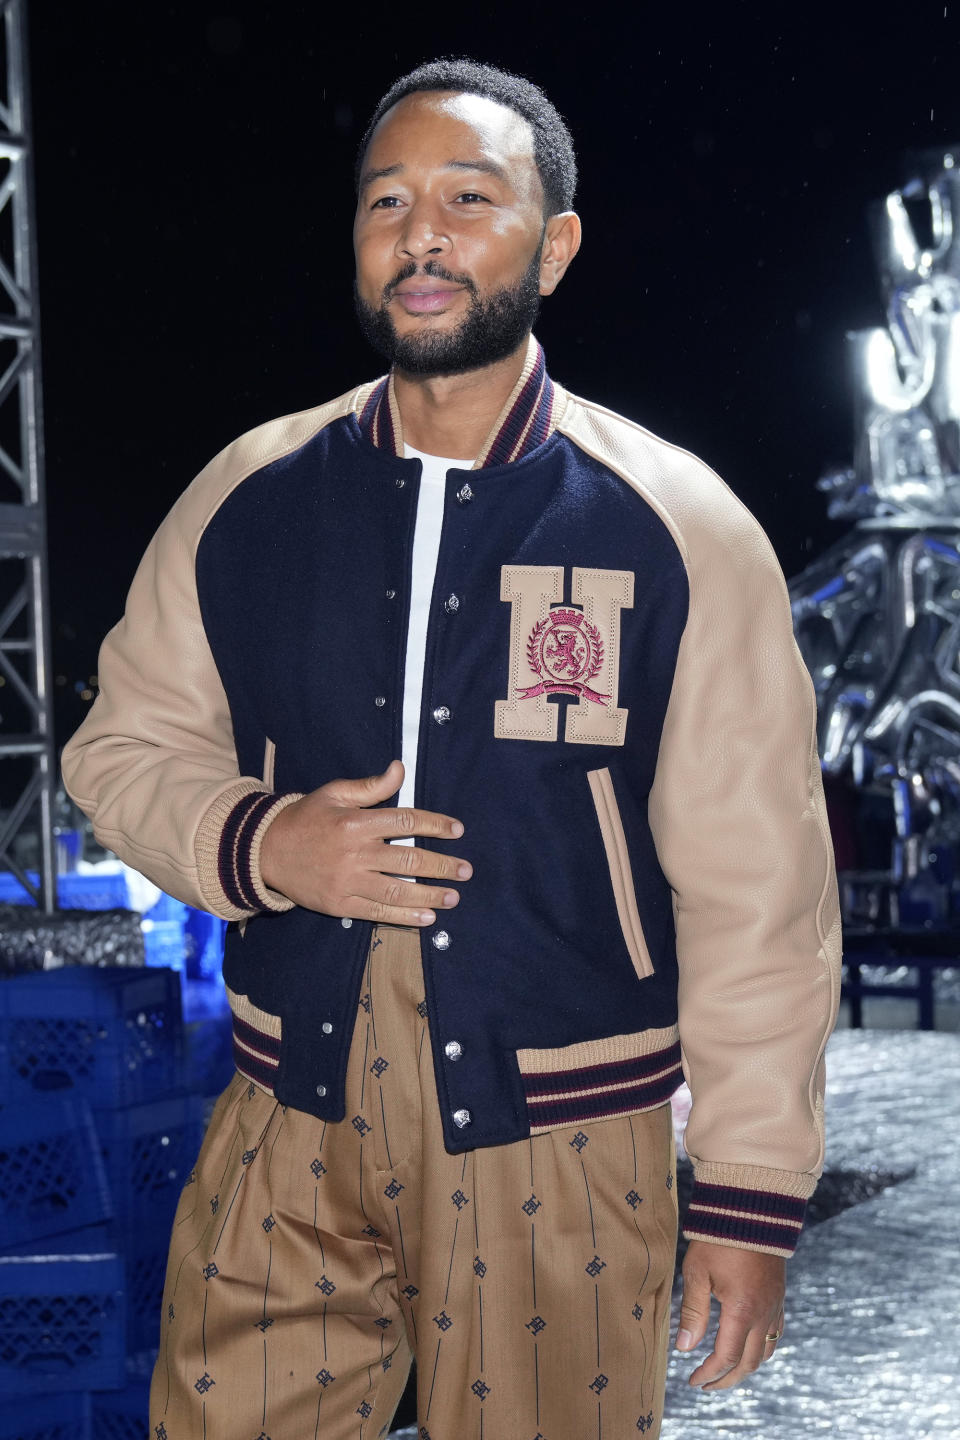 John Legend attends the Tommy Hilfiger Fall 2022 fashion show at the Skyline Drive-In on Sunday, Sept. 11, 2022, in New York. (Photo by Charles Sykes/Invision/AP)